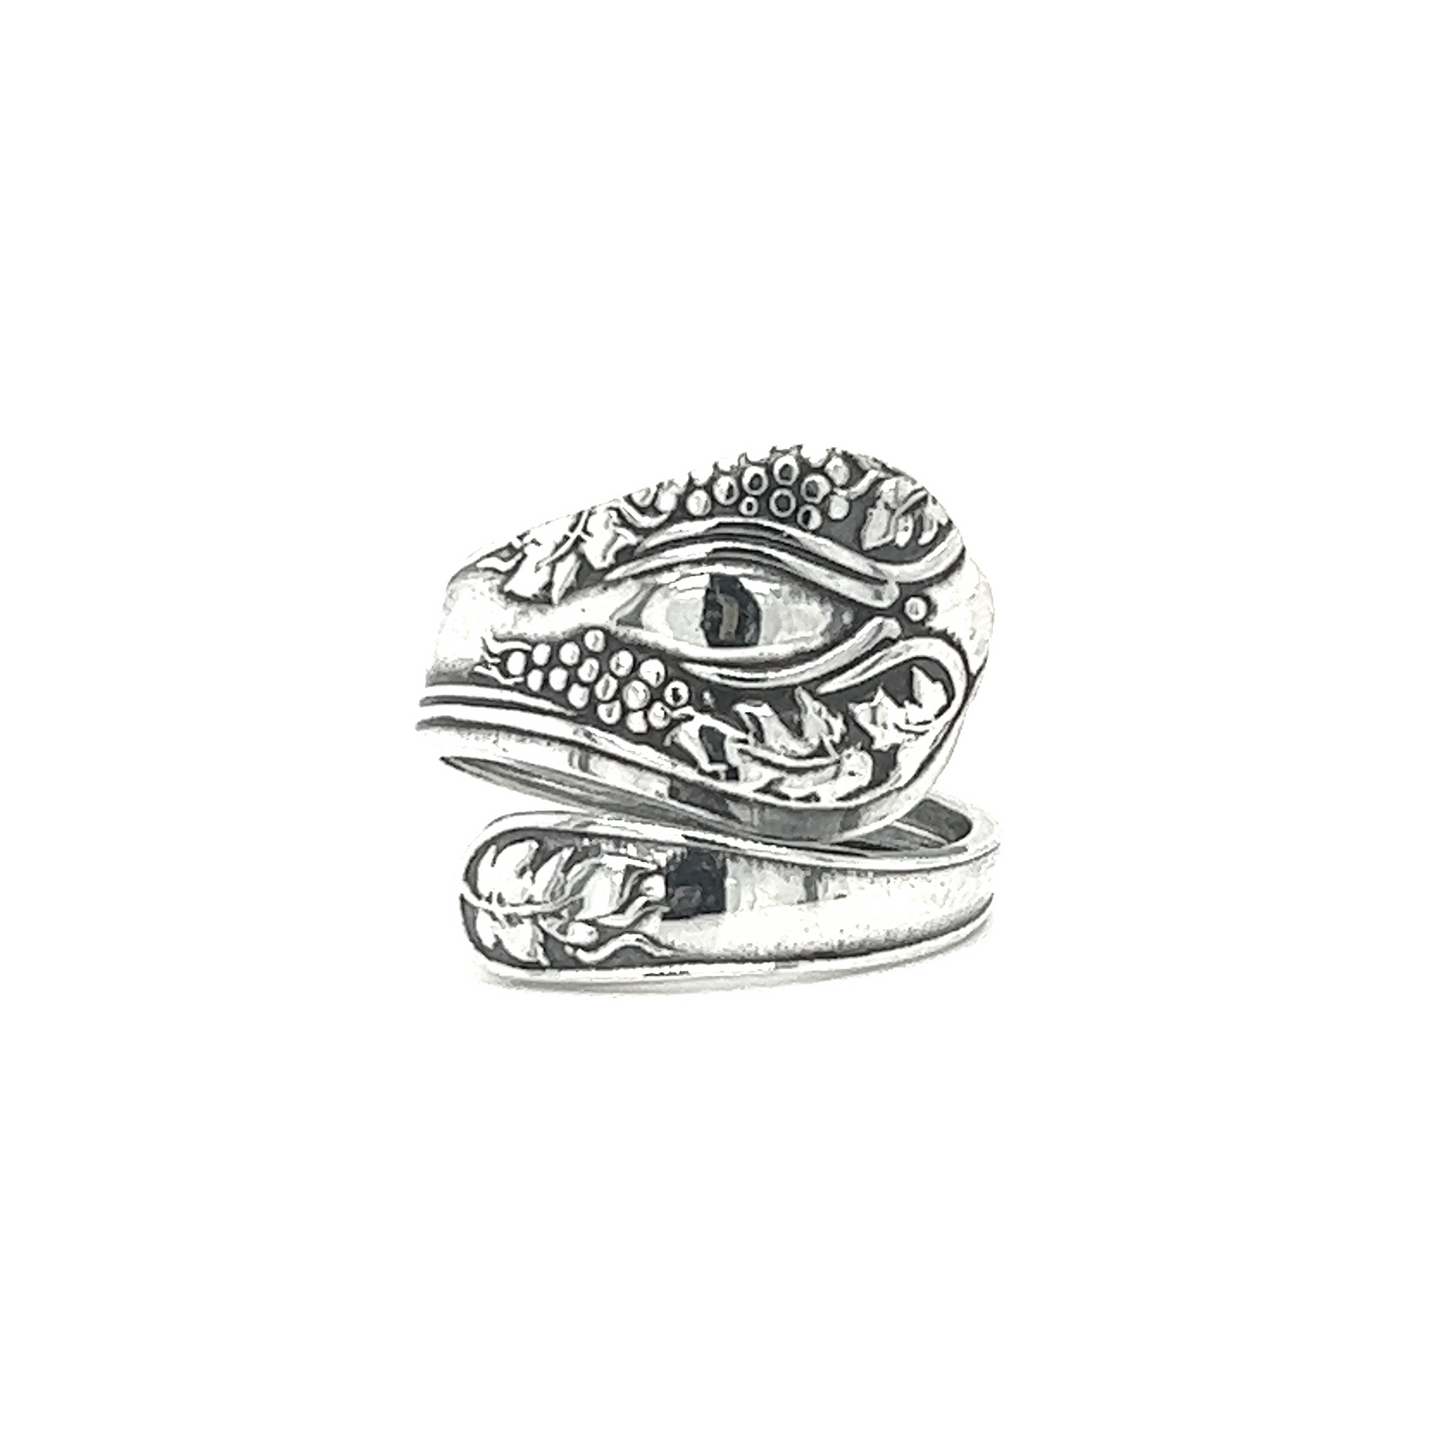 A Timeless Spoon Ring with an eye on it, exuding old-world romance.